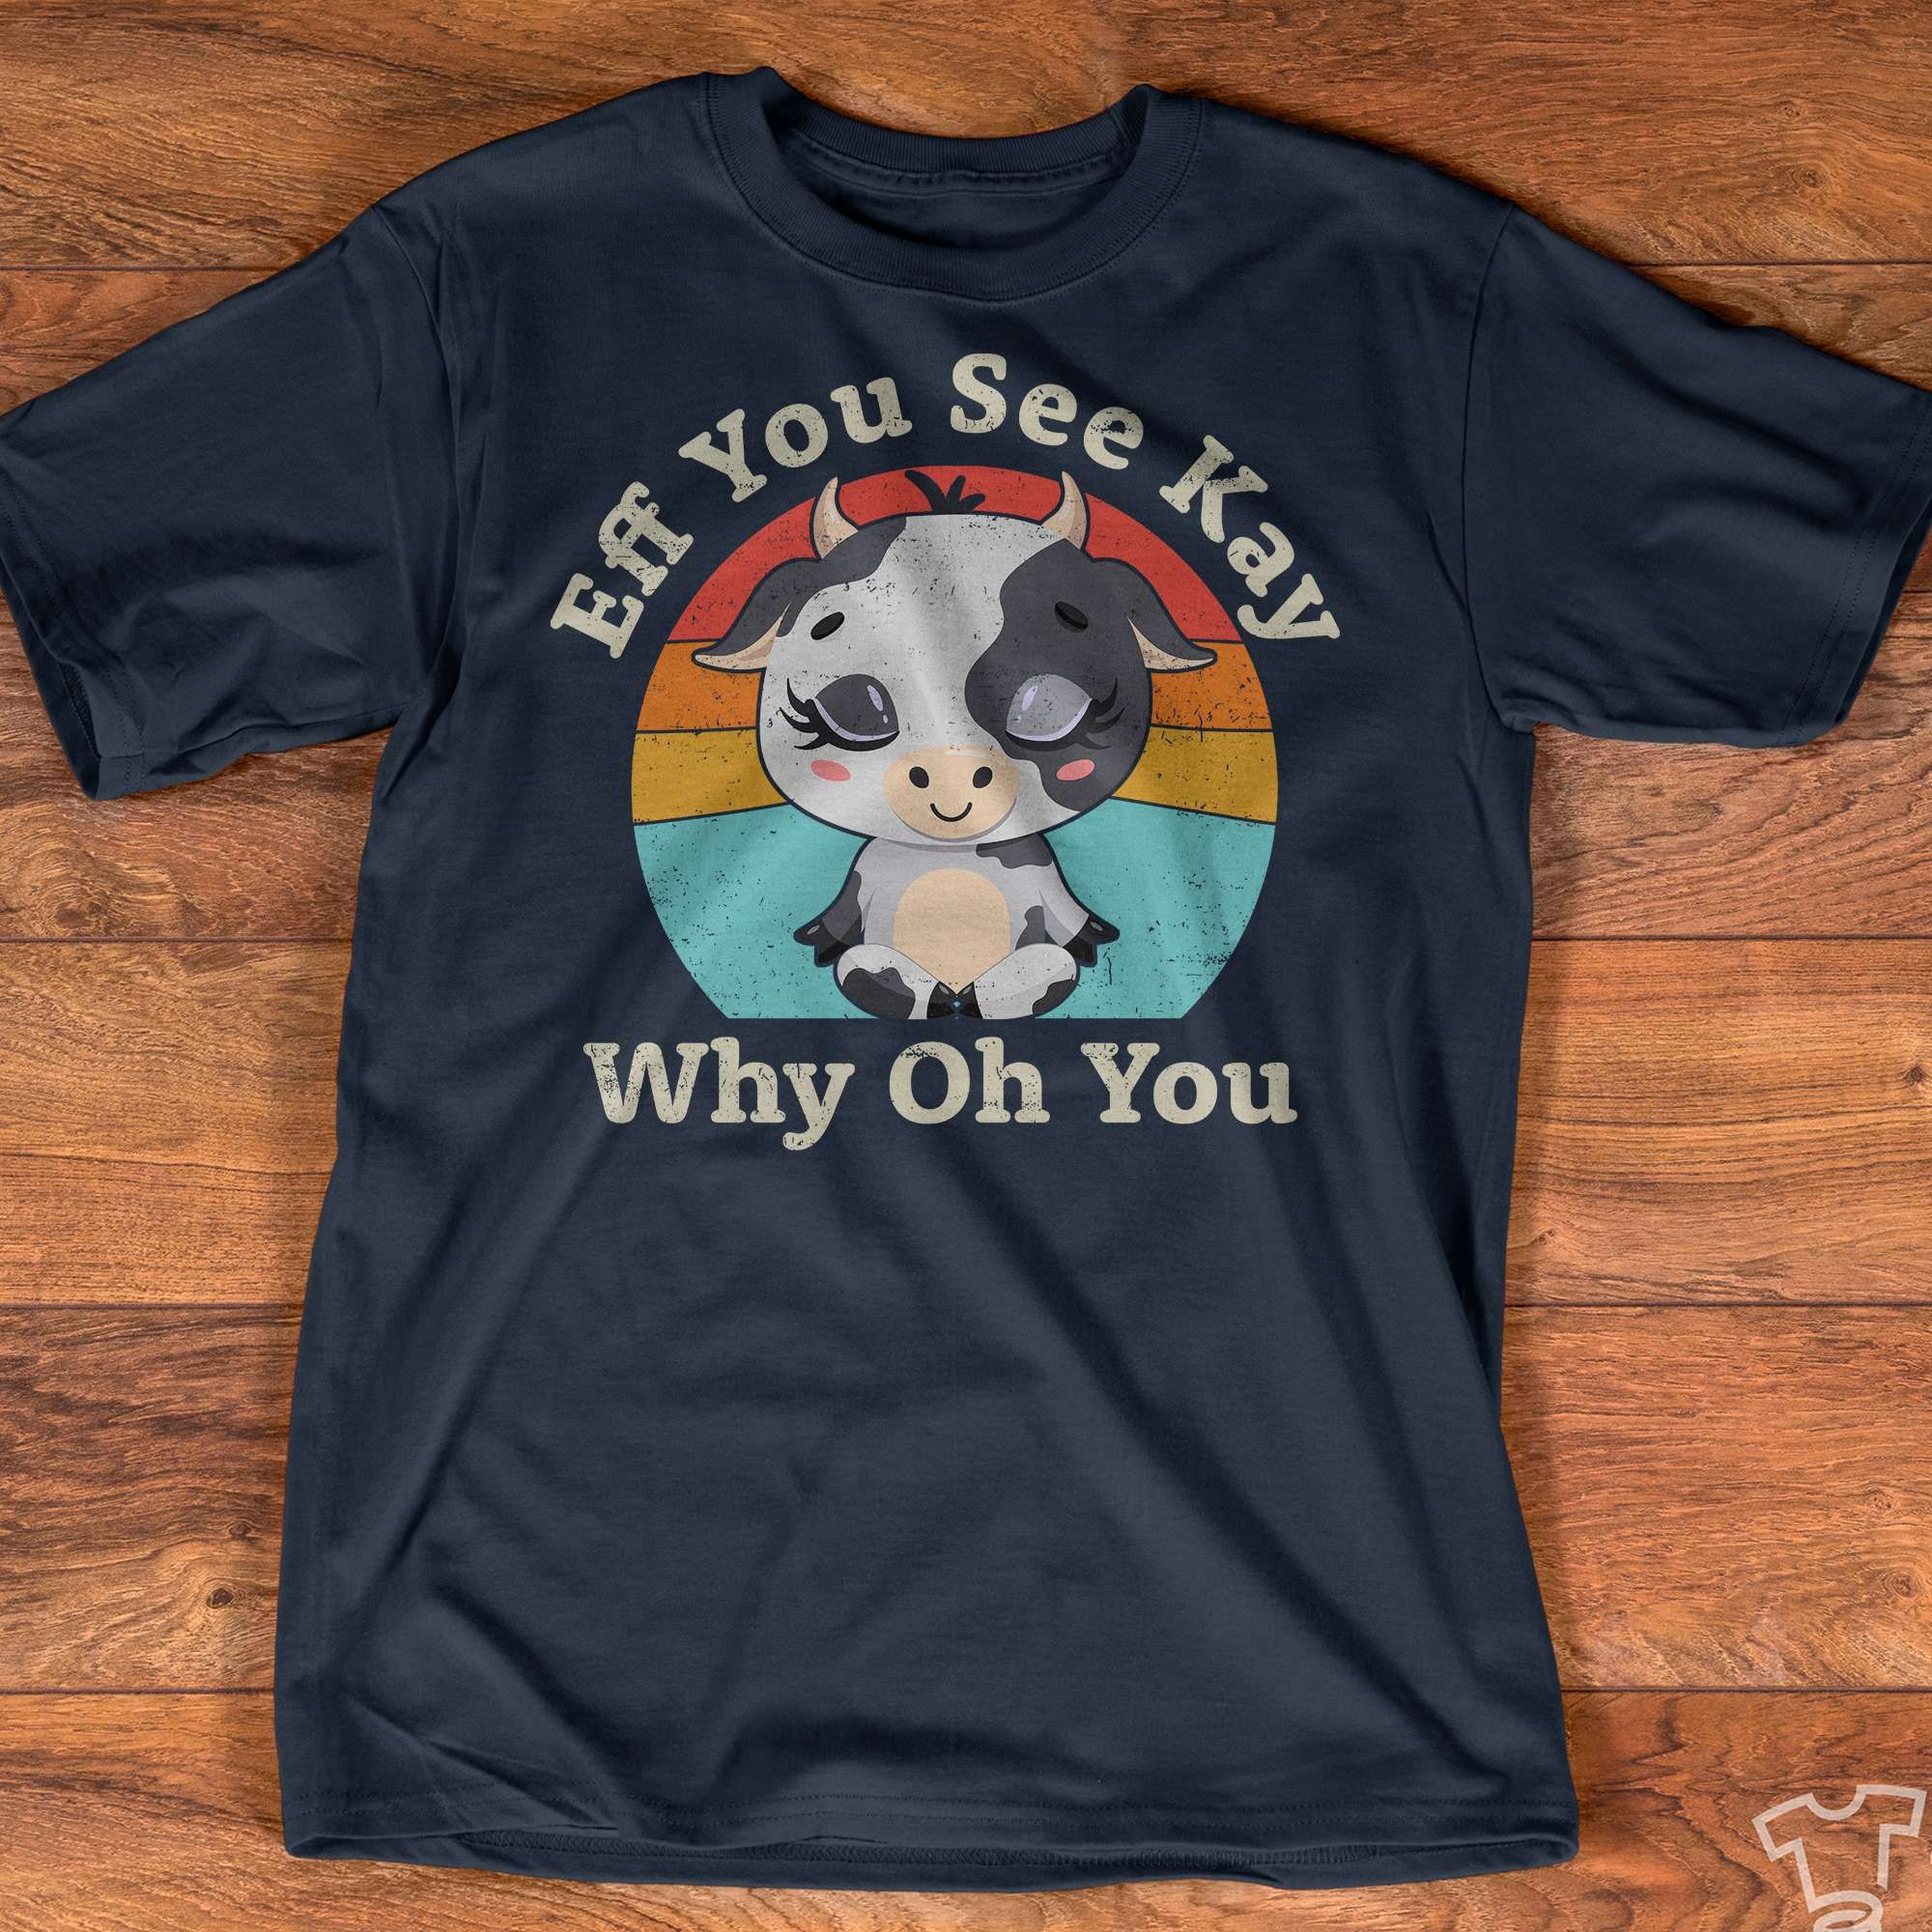 Eff you see kay, why oh you - Funny cow graphic T-shirt